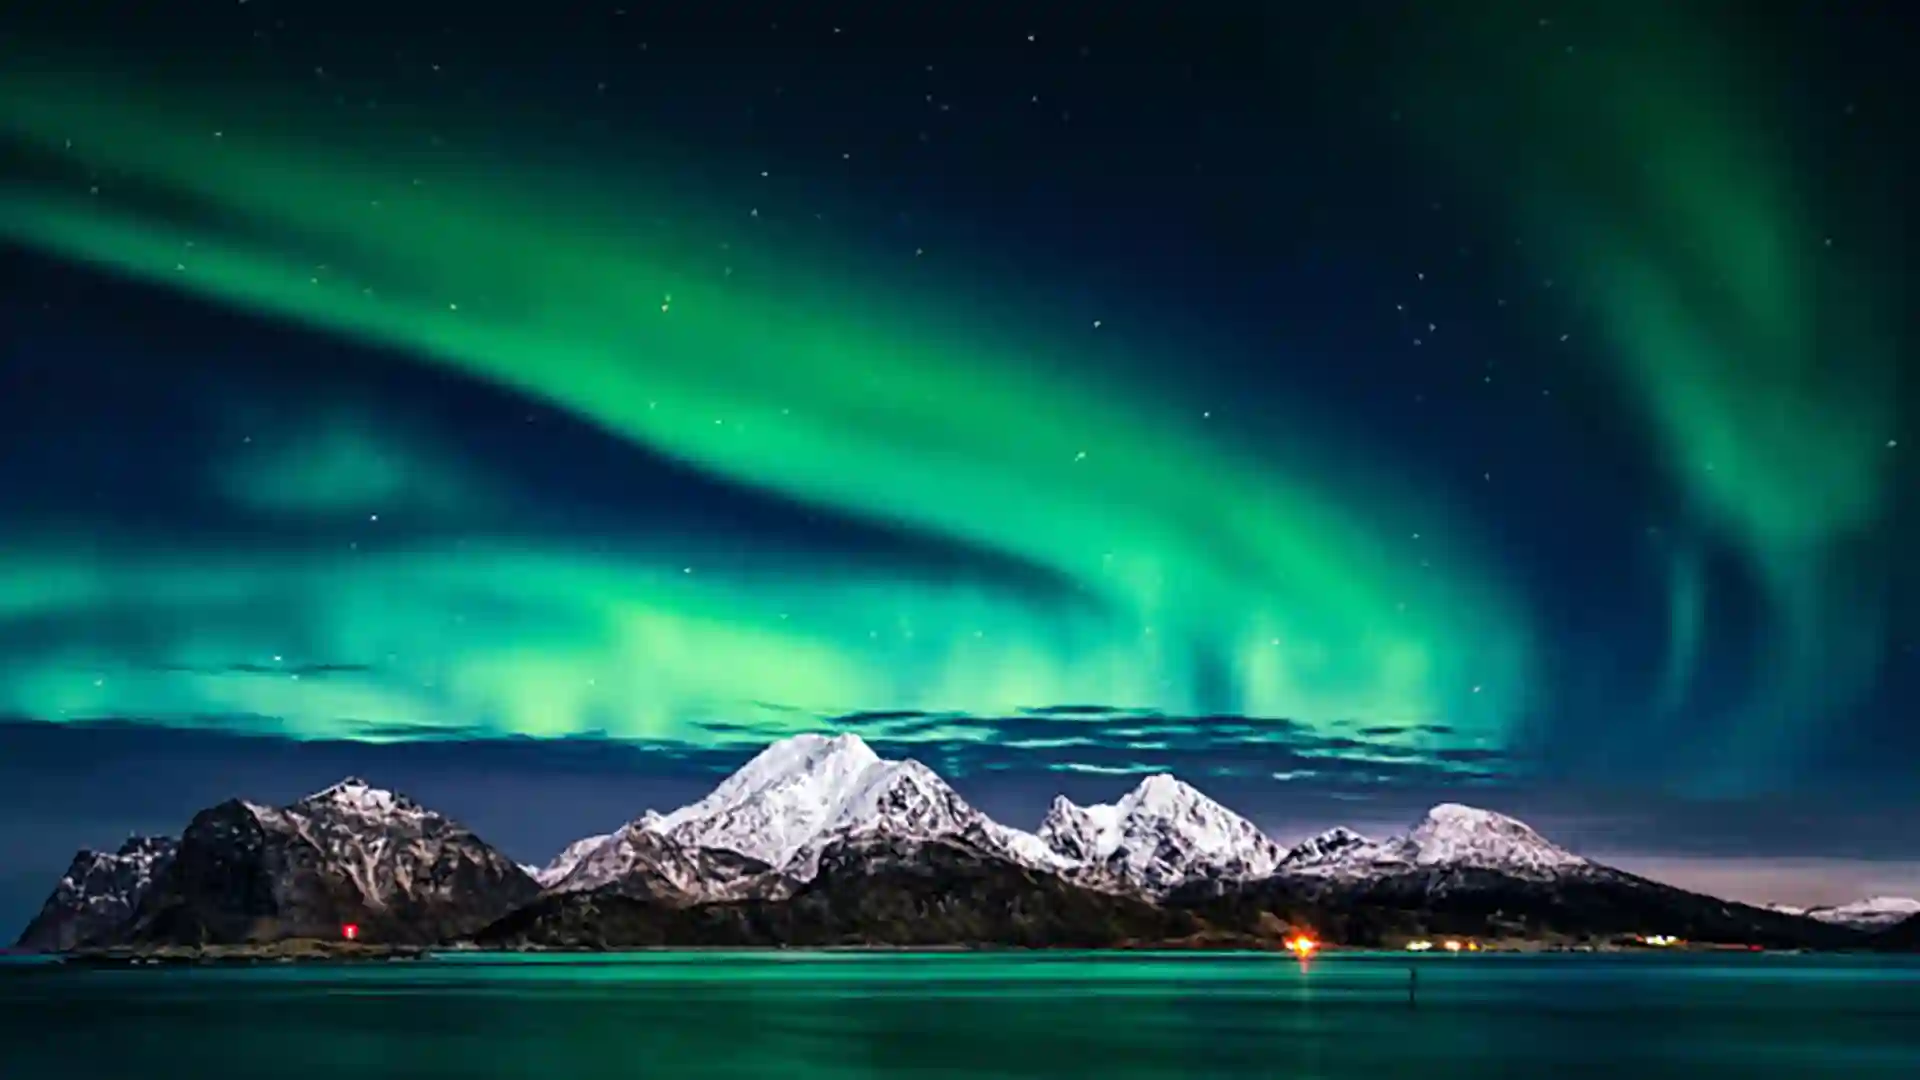 Green northern lights appear above snow-capped mountains under dark night sky.